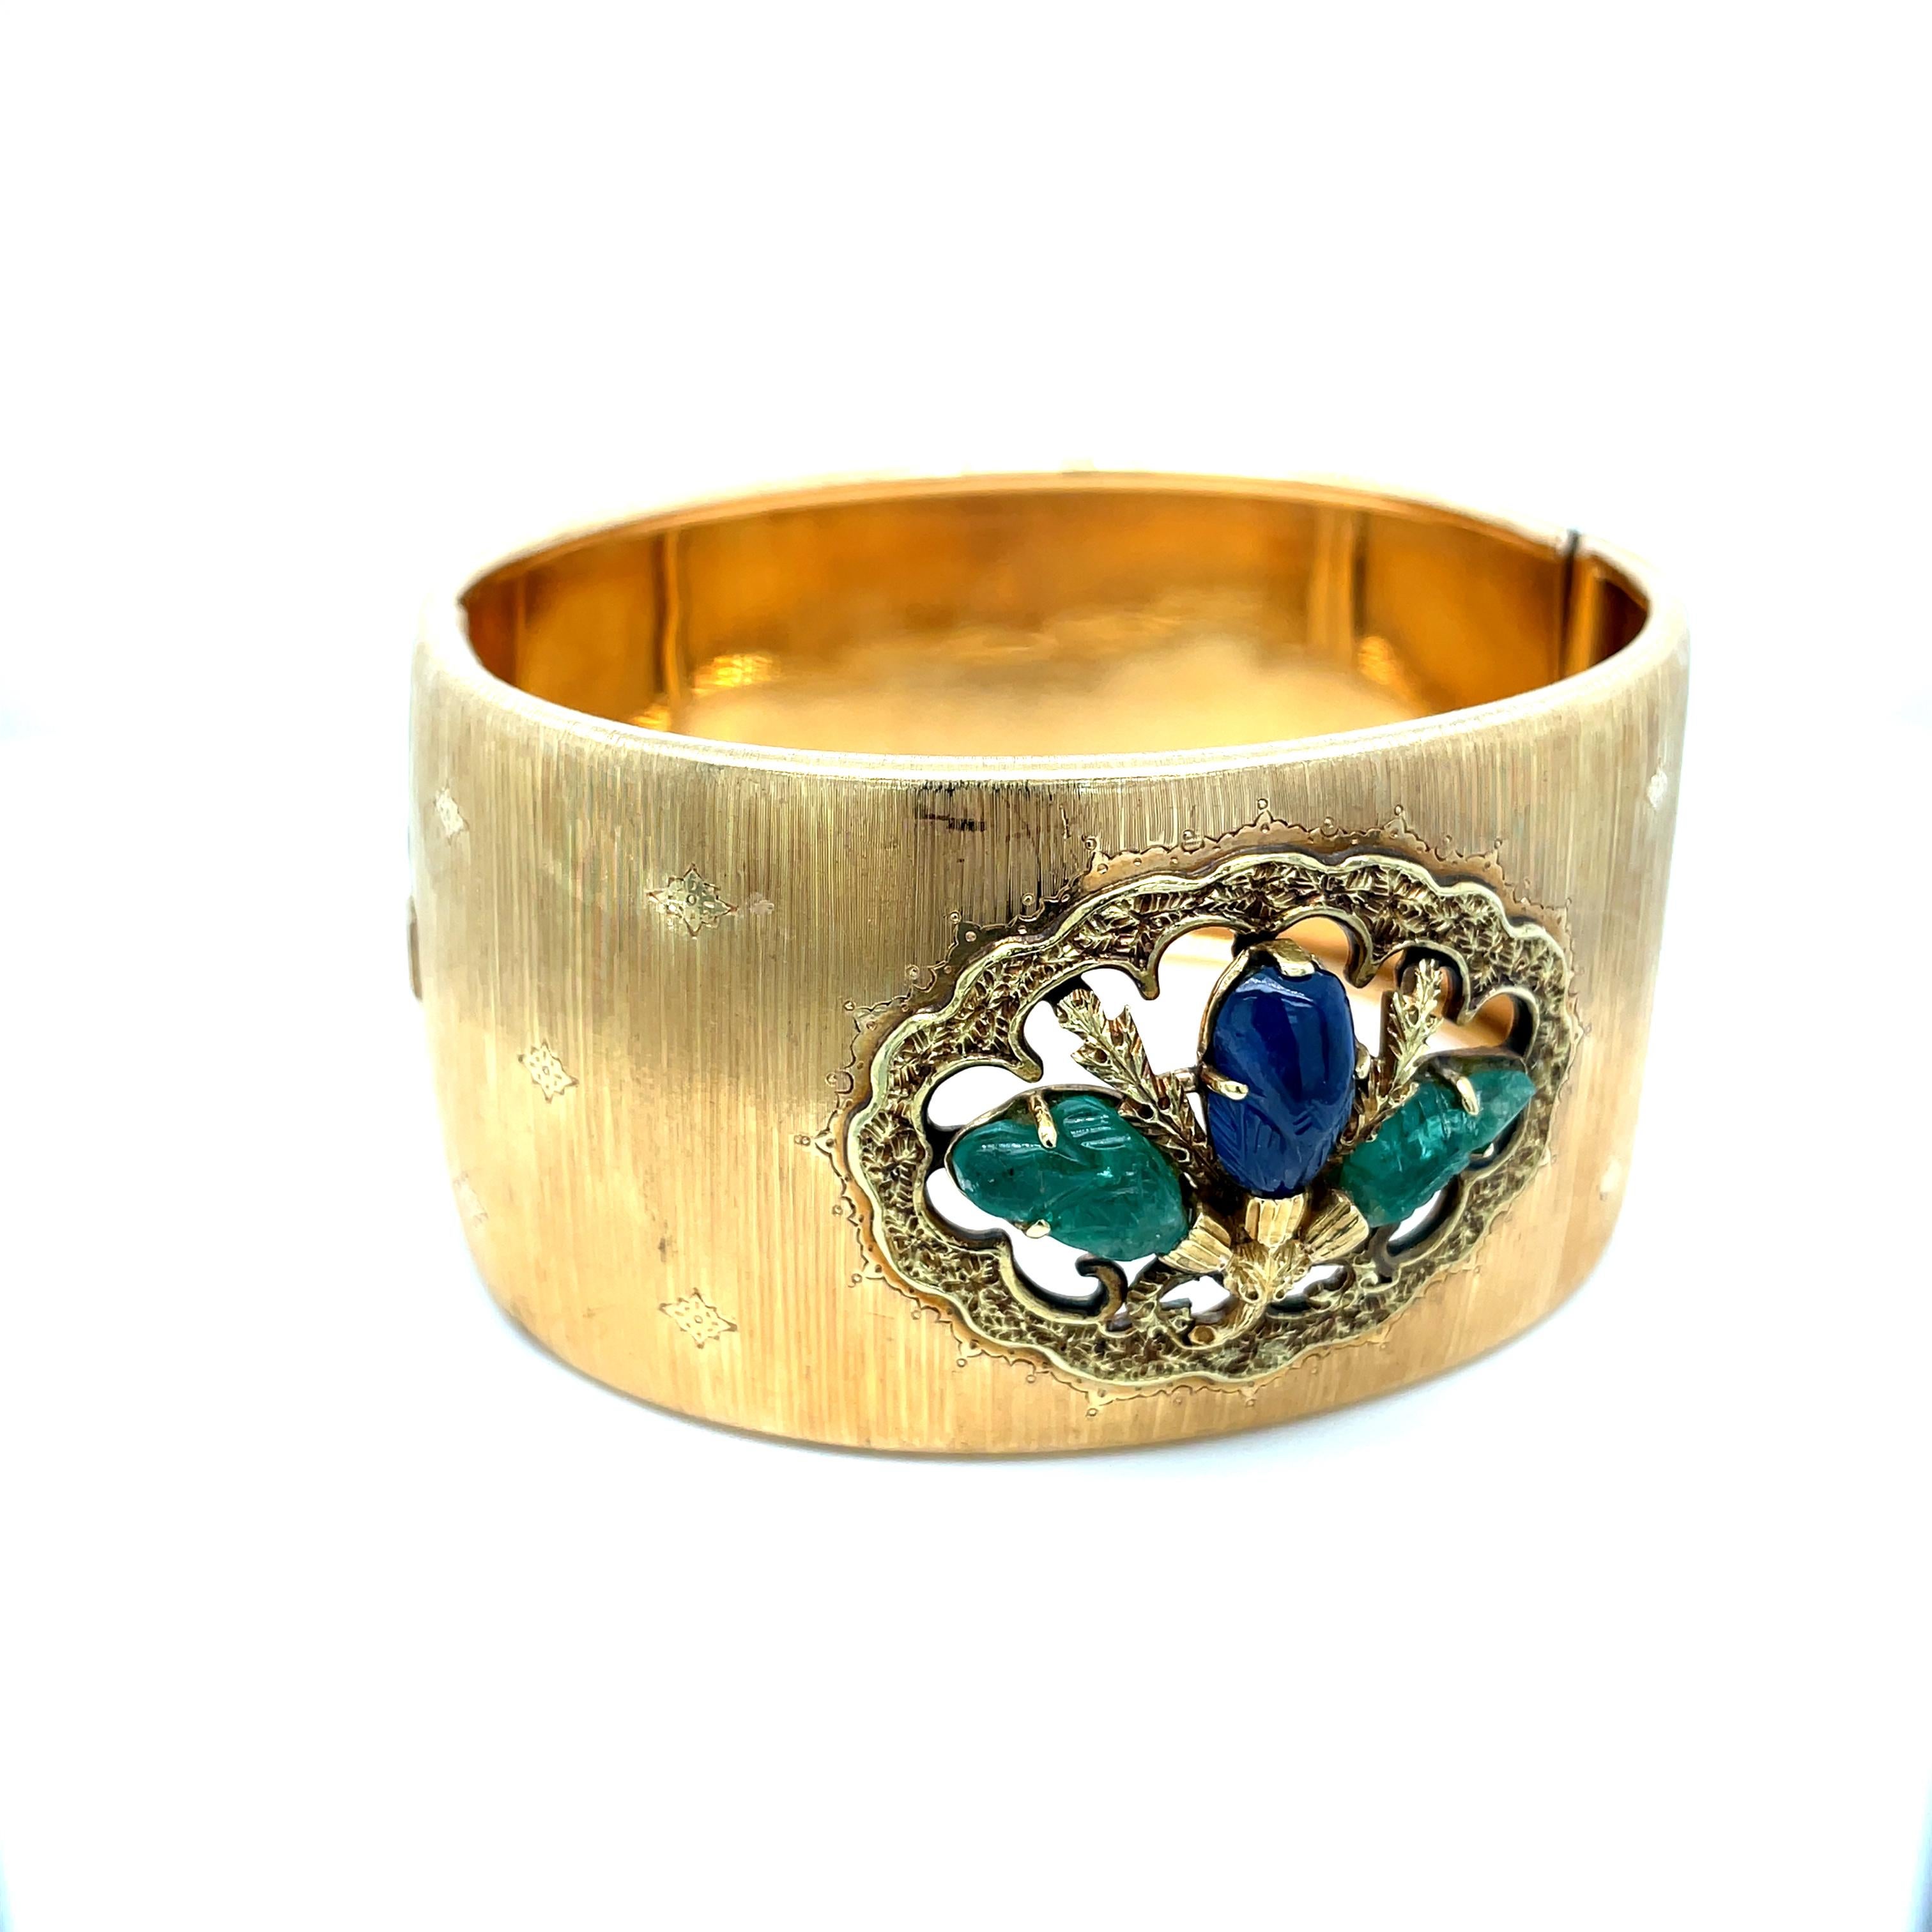 Iconic Mario Buccellati Wide Bracelet in yellow gold set with Tutti Frutti carved natural emeralds and sapphire. 
The rigato effect is obtained by handmade engraving. Small and shiny gold beads play with the opaque texture.
Has a total weight of 62